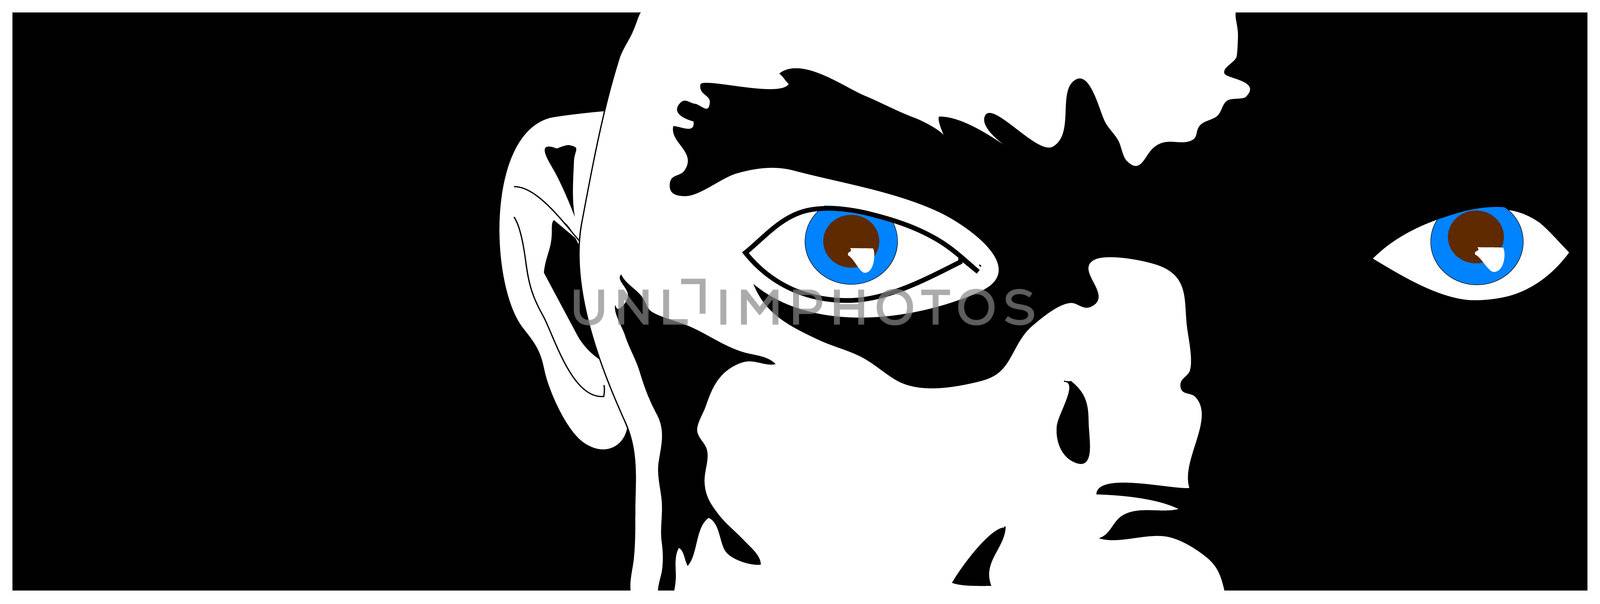 A face in partial darkness, blue eyes glinting from the shadows. Hand drawn illustration.